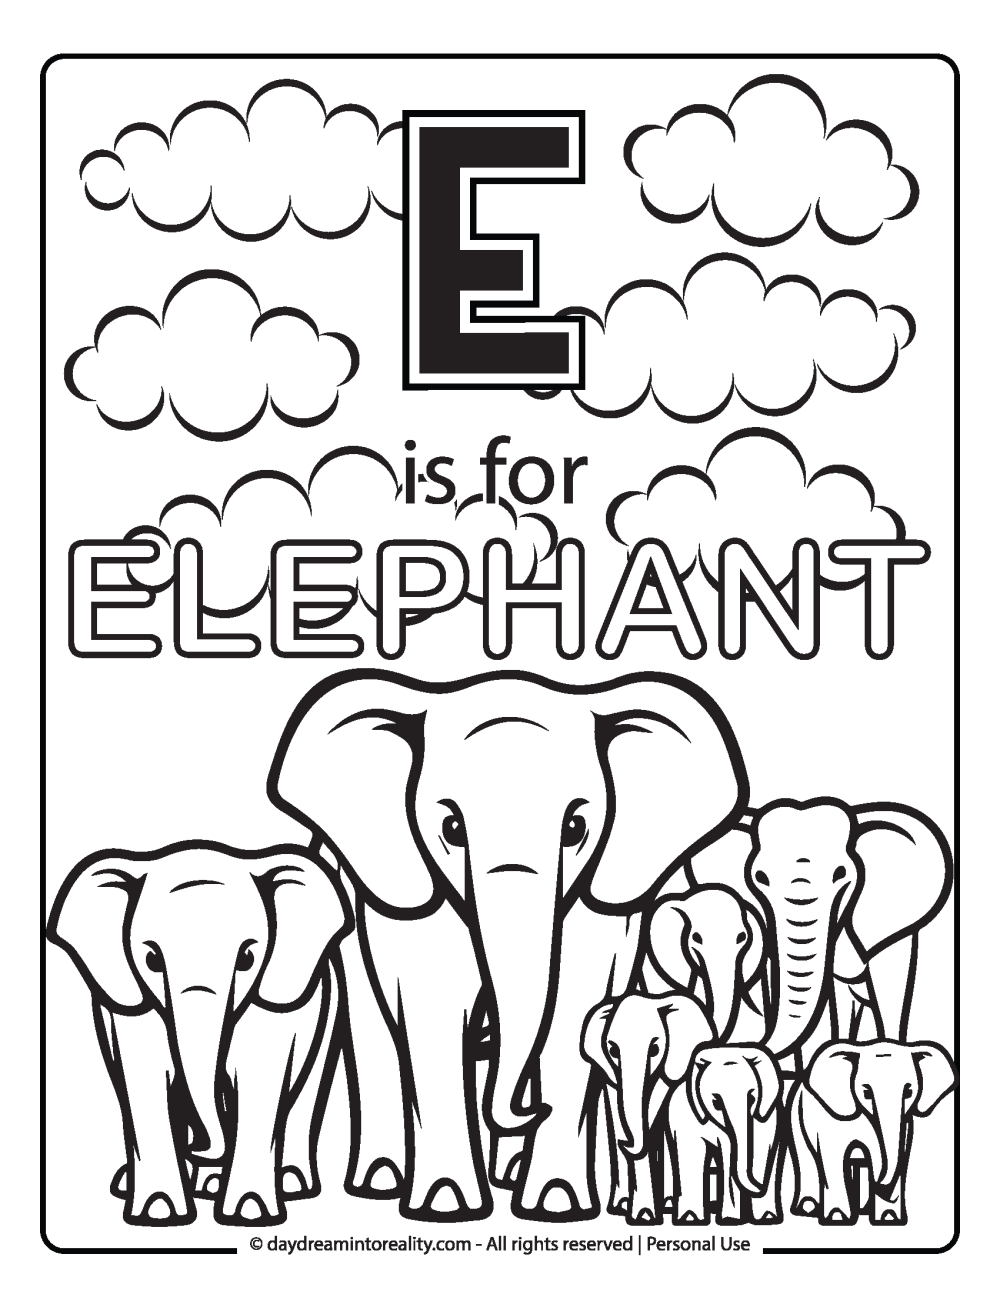 Letter E coloring page worksheet free printables. E is for elephant.